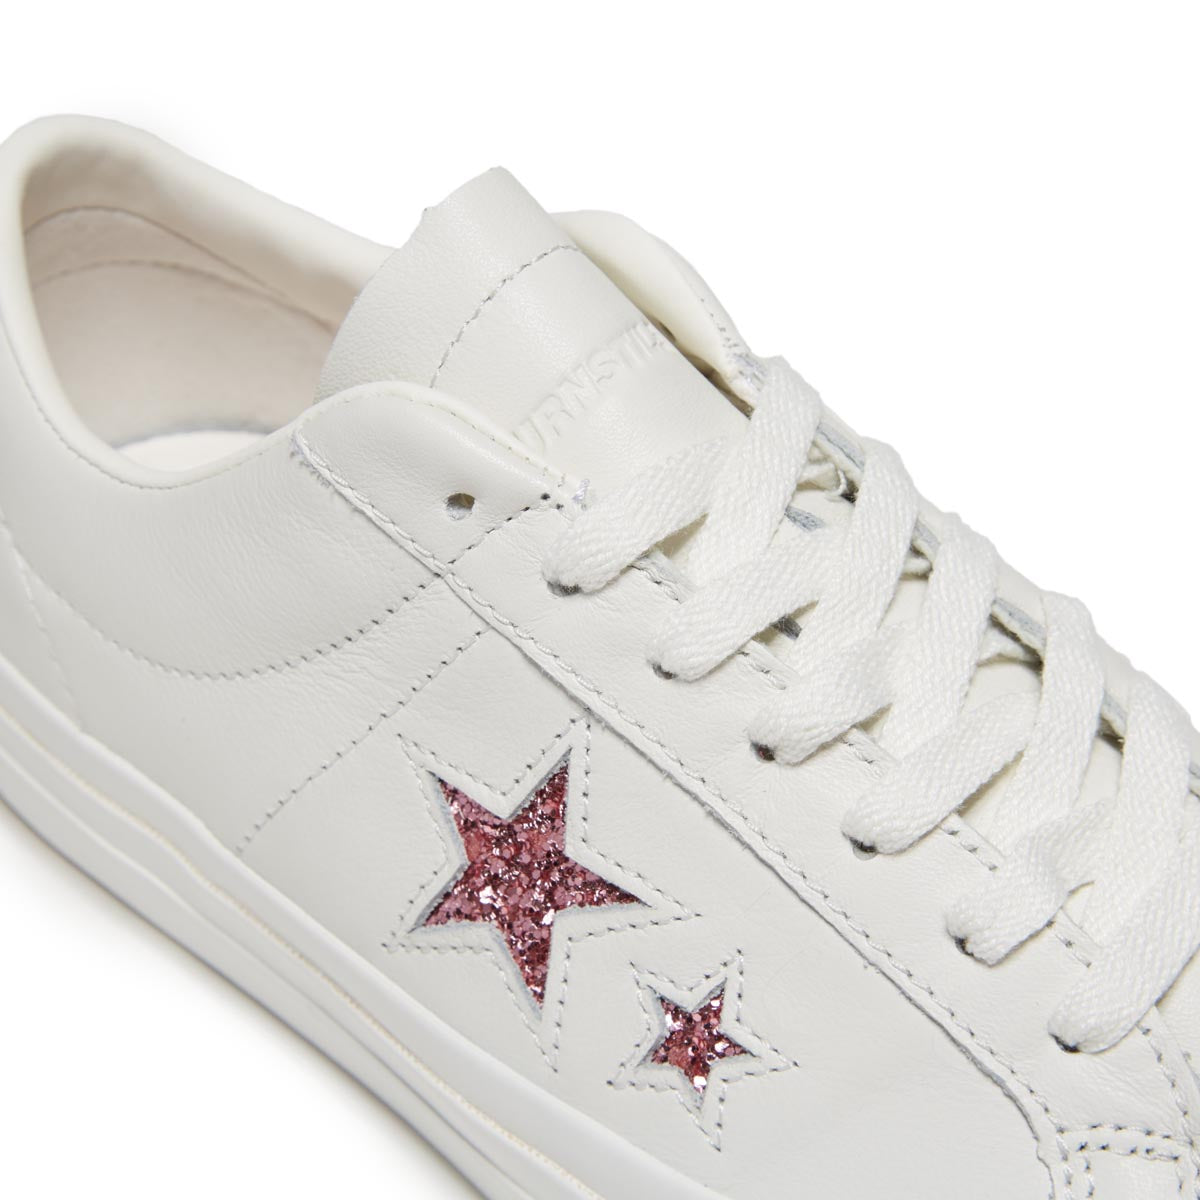 Converse x Turnstile One Star Pro Ox Shoes - White/Pink/White image 5